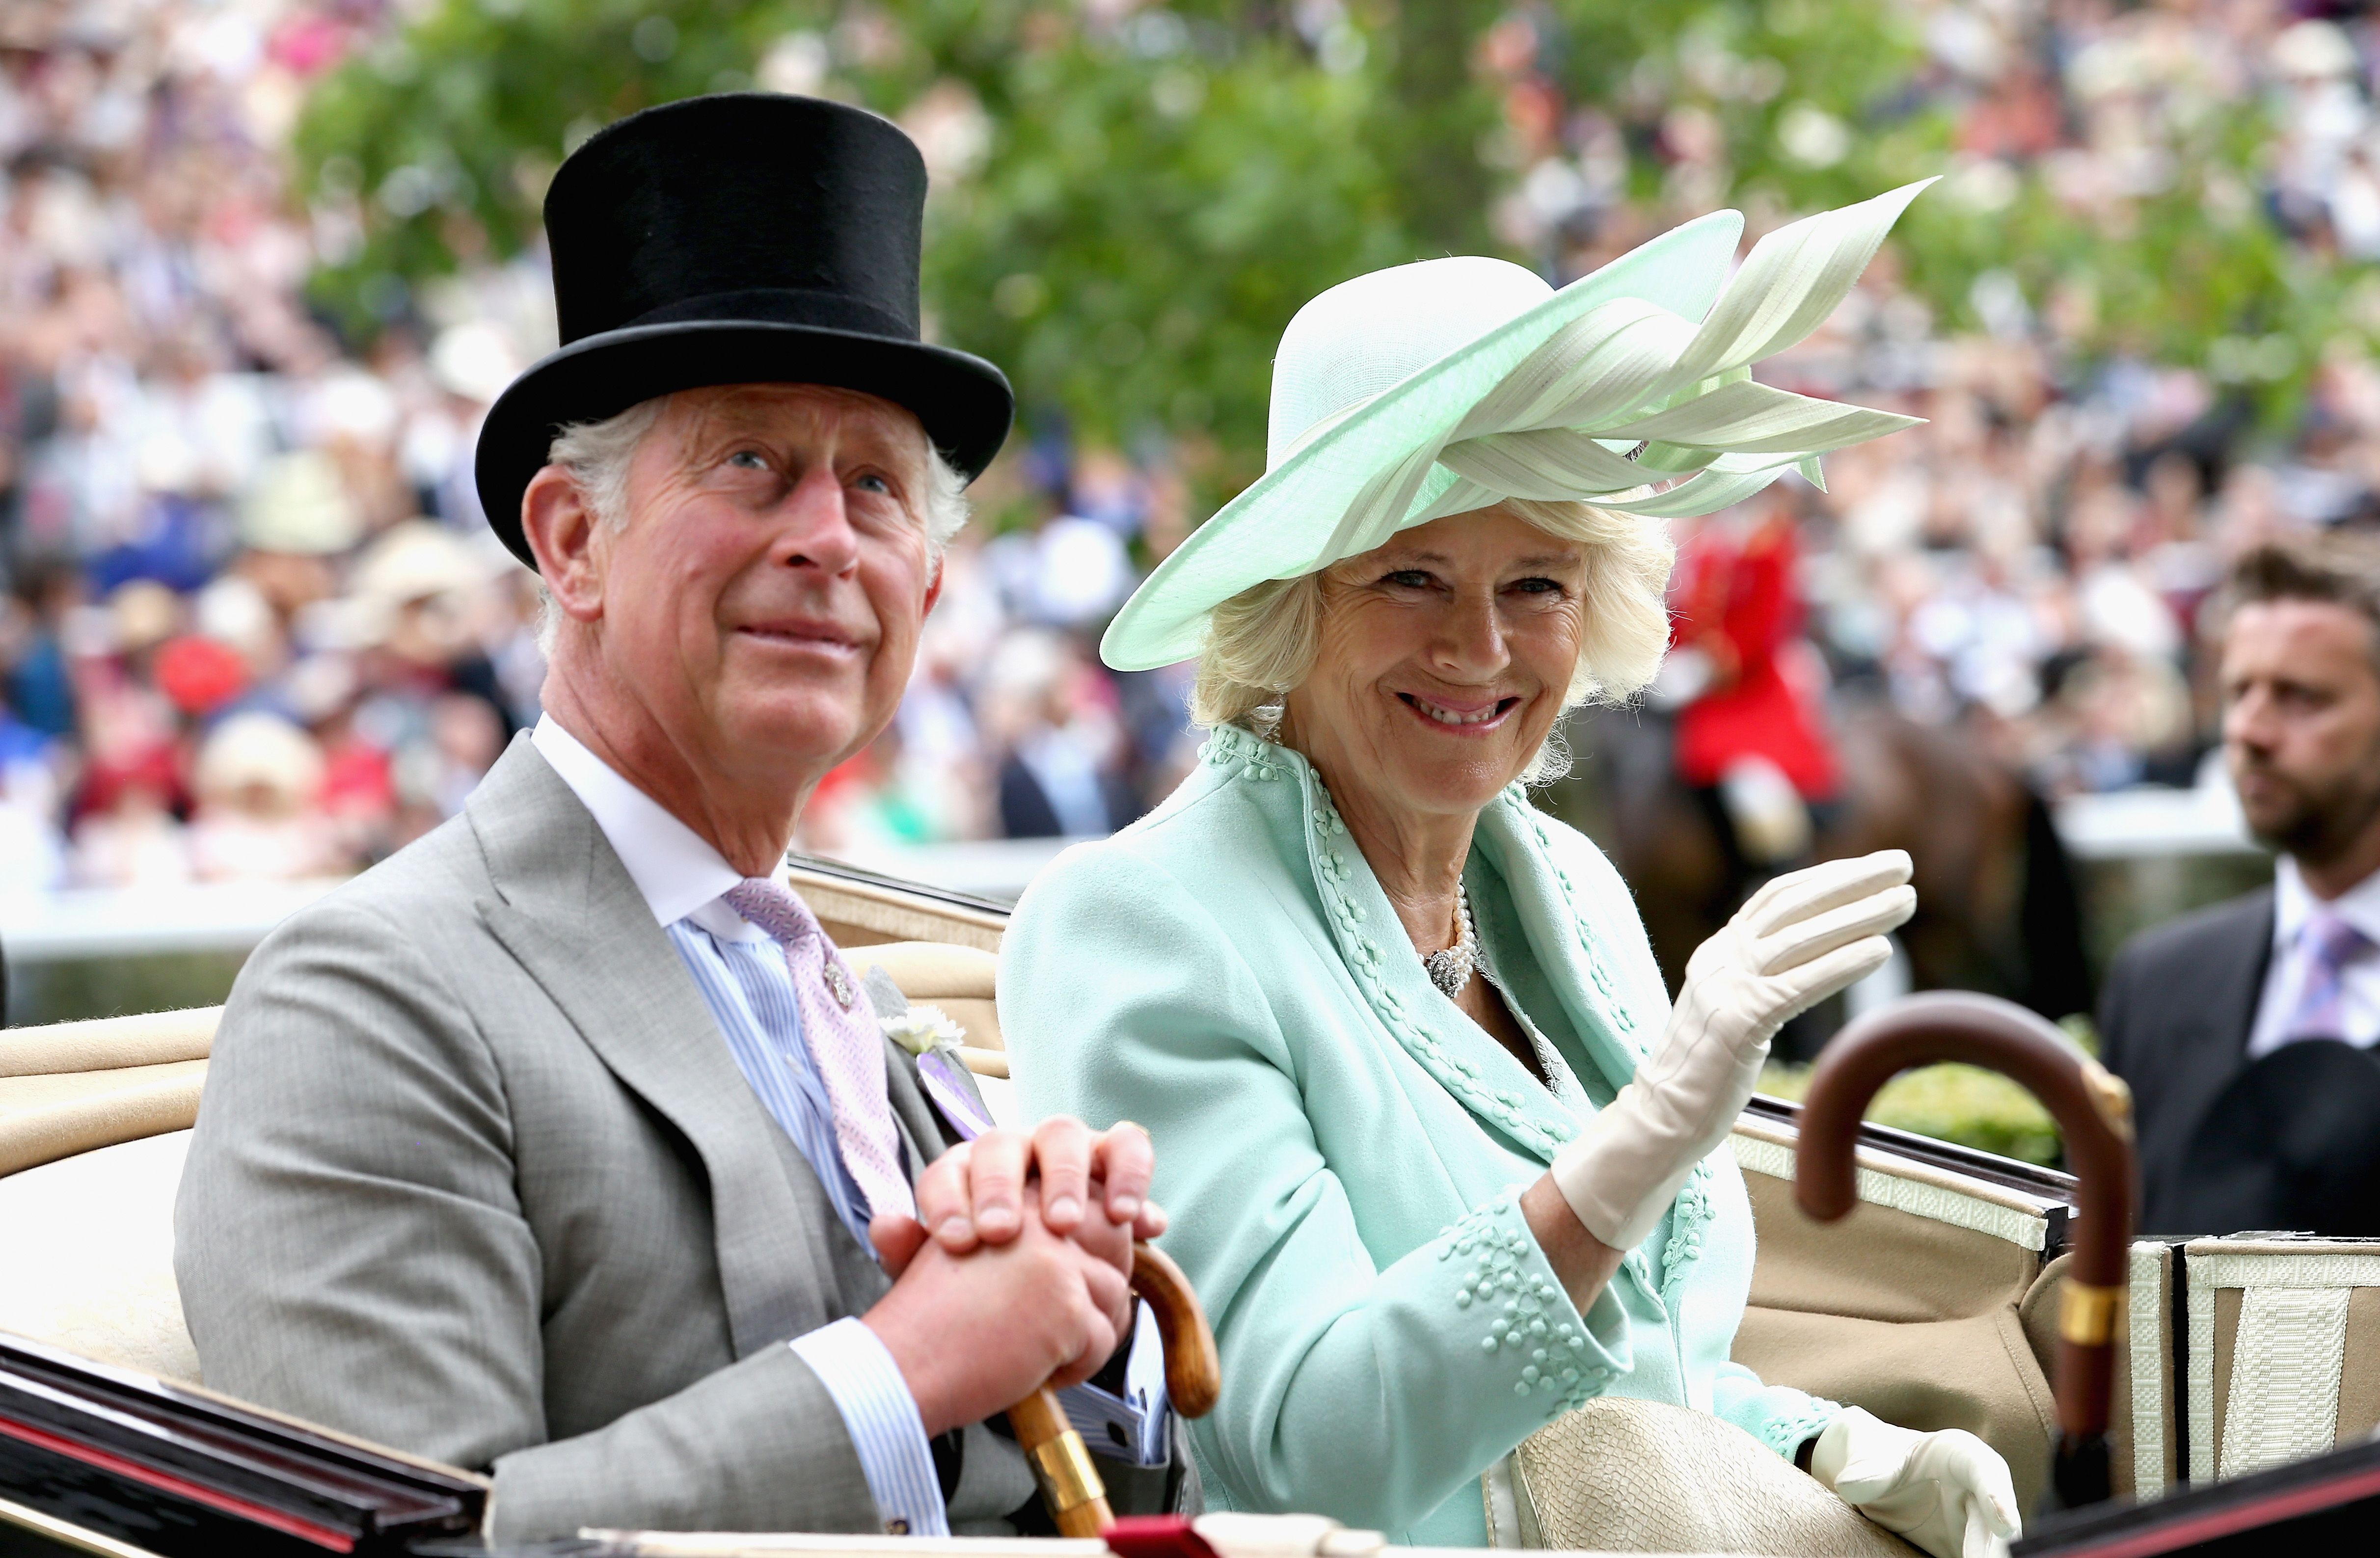 Prince Charles S Handwriting Reveals A Lot About His Marriage With Camilla Parker Bowles